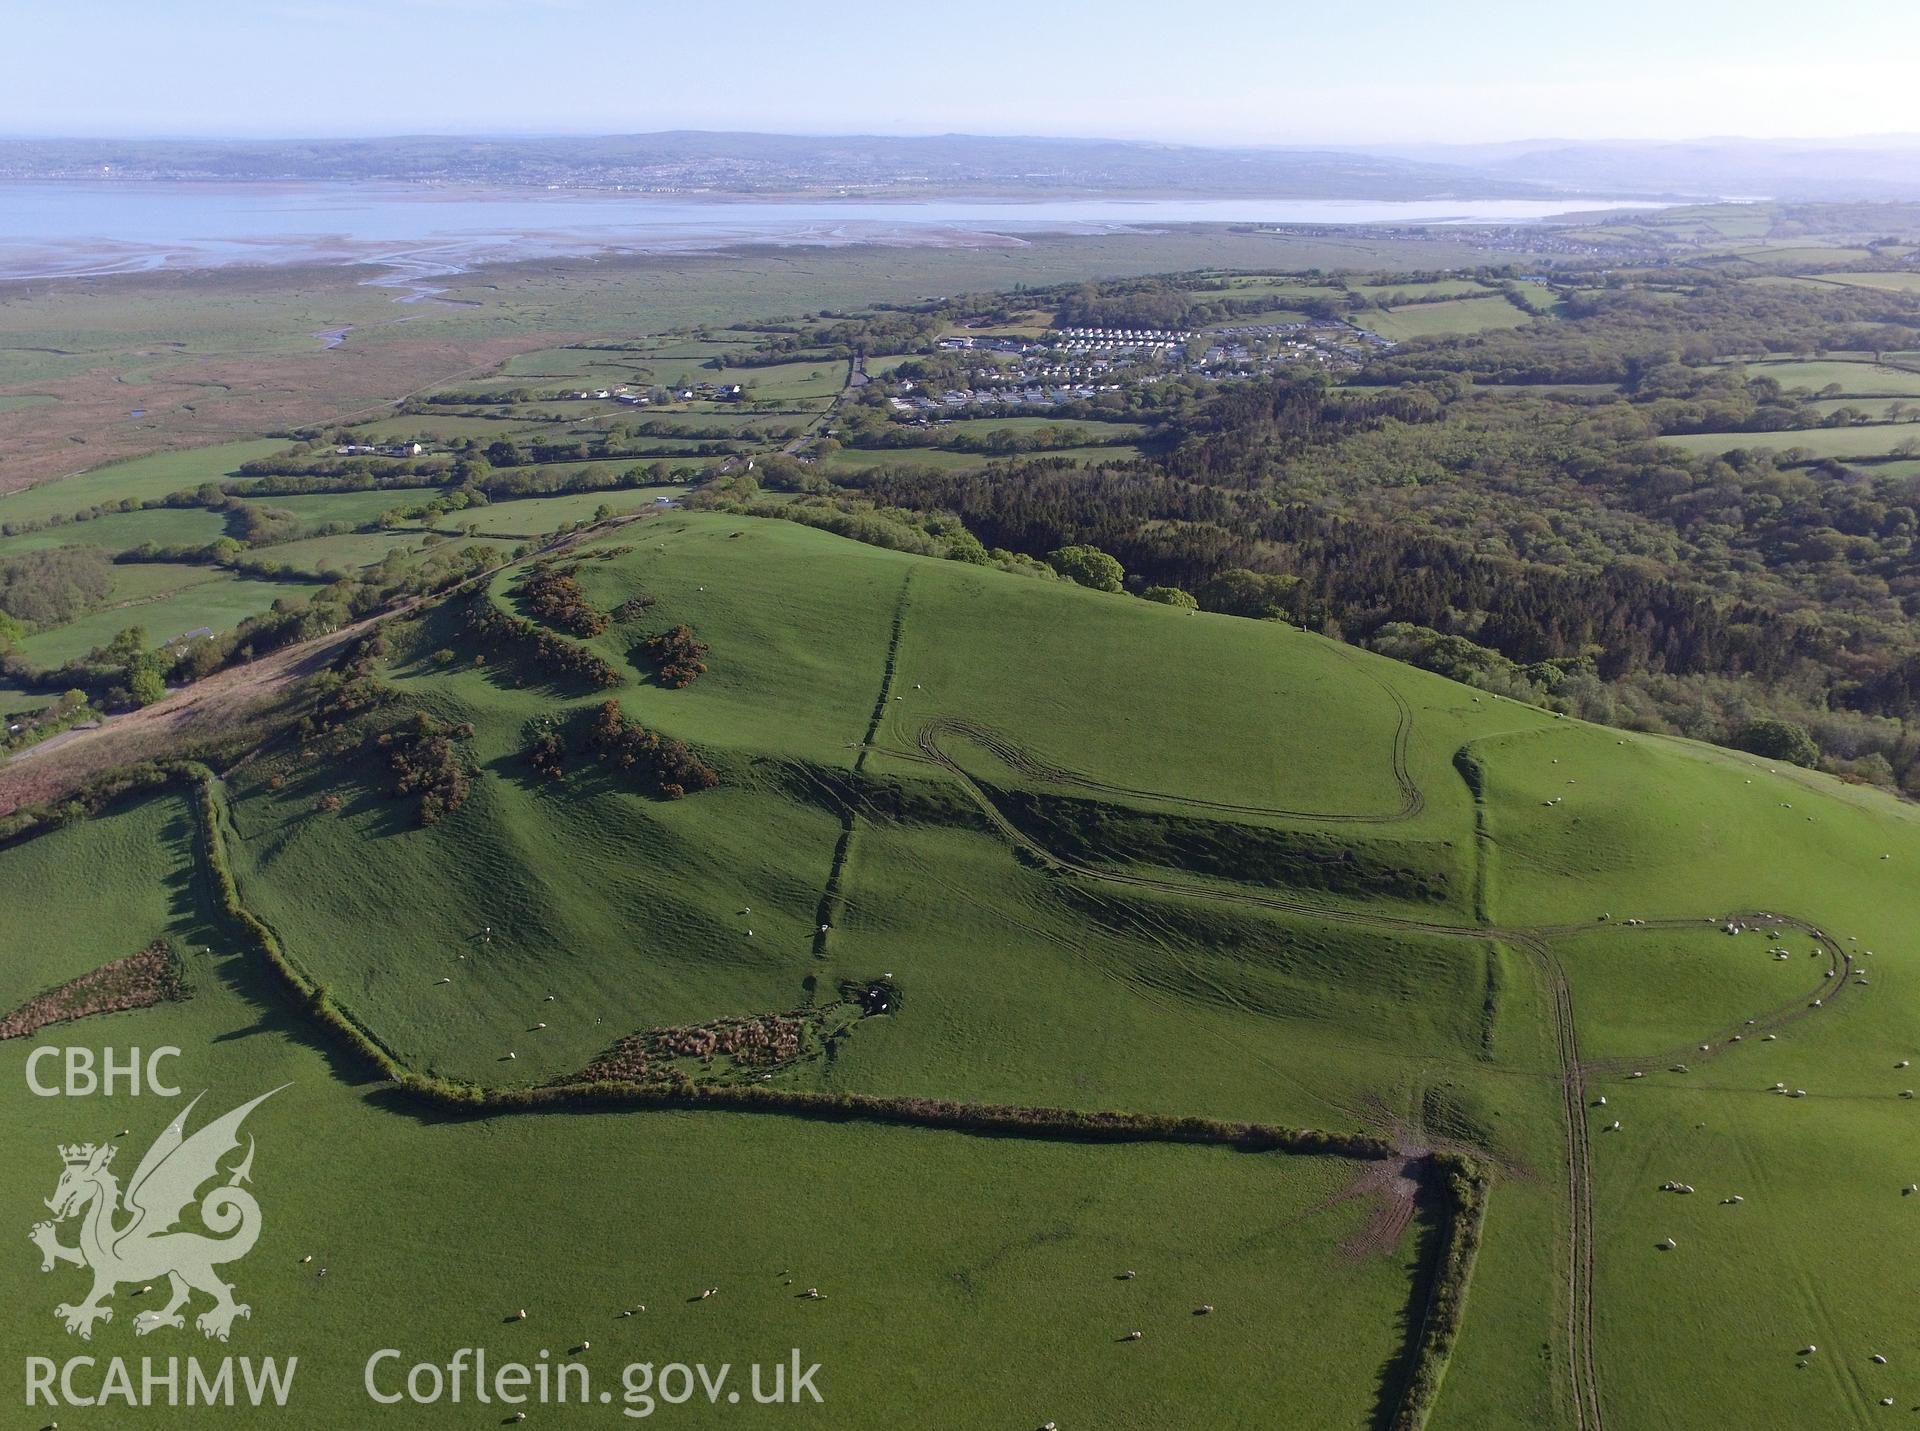 Colour photo showing aerial view of Cil Ifor top promontory fort, taken by Paul R. Davis, 13th May 2018.